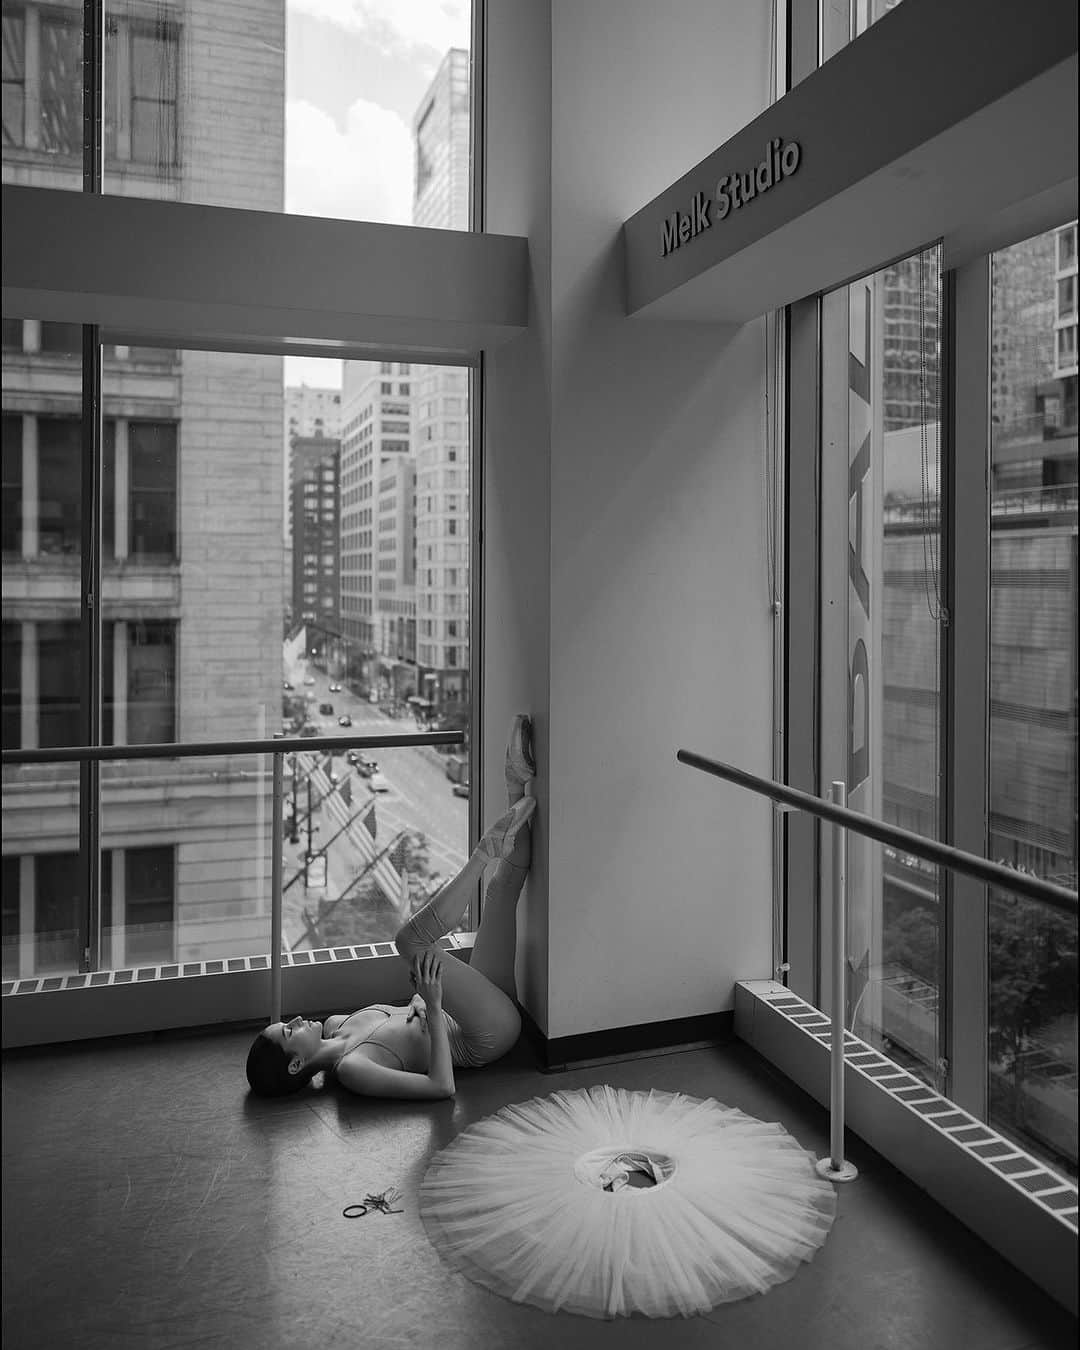 ballerina projectのインスタグラム：「𝐁𝐚𝐬𝐢𝐚 𝐑𝐡𝐨𝐝𝐞𝐧 at Joffrey Ballet in Chicago.   @basia.rhoden #basiarhoden #ballerinaproject #joffreyballet #chicago #ballerina #ballet #balletstudio #barre #tutu   Ballerina Project 𝗹𝗮𝗿𝗴𝗲 𝗳𝗼𝗿𝗺𝗮𝘁 𝗹𝗶𝗺𝗶𝘁𝗲𝗱 𝗲𝗱𝘁𝗶𝗼𝗻 𝗽𝗿𝗶𝗻𝘁𝘀 and 𝗜𝗻𝘀𝘁𝗮𝘅 𝗰𝗼𝗹𝗹𝗲𝗰𝘁𝗶𝗼𝗻𝘀 on sale in our Etsy store. Link is located in our bio.  𝙎𝙪𝙗𝙨𝙘𝙧𝙞𝙗𝙚 to the 𝐁𝐚𝐥𝐥𝐞𝐫𝐢𝐧𝐚 𝐏𝐫𝐨𝐣𝐞𝐜𝐭 on Instagram to have access to exclusive and never seen before content. 🩰」